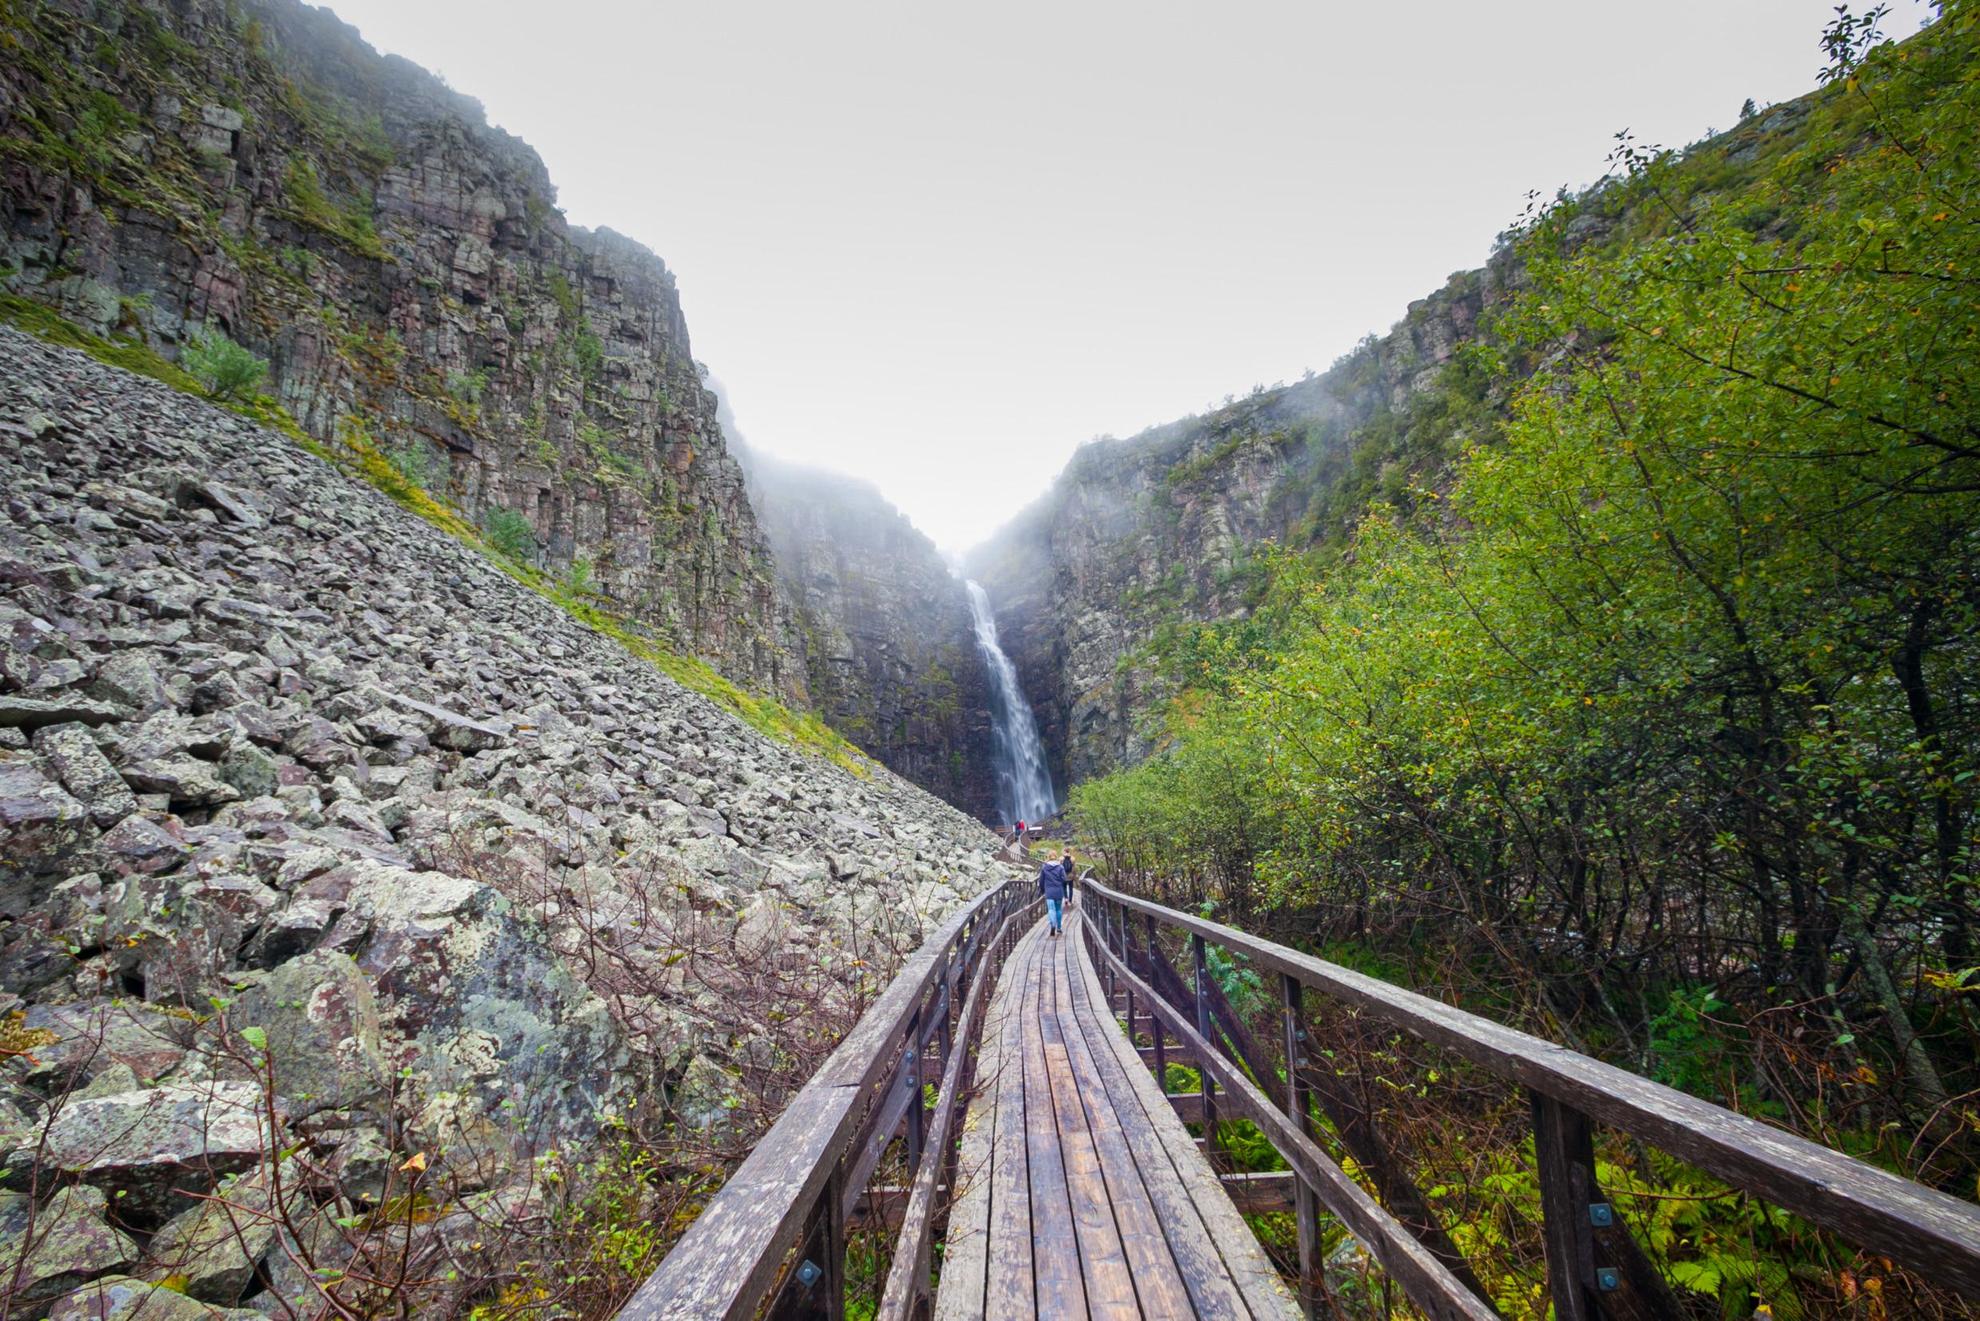 People are hiking on a boardwalk at Fulufjällets National Park, with views of a waterfall.